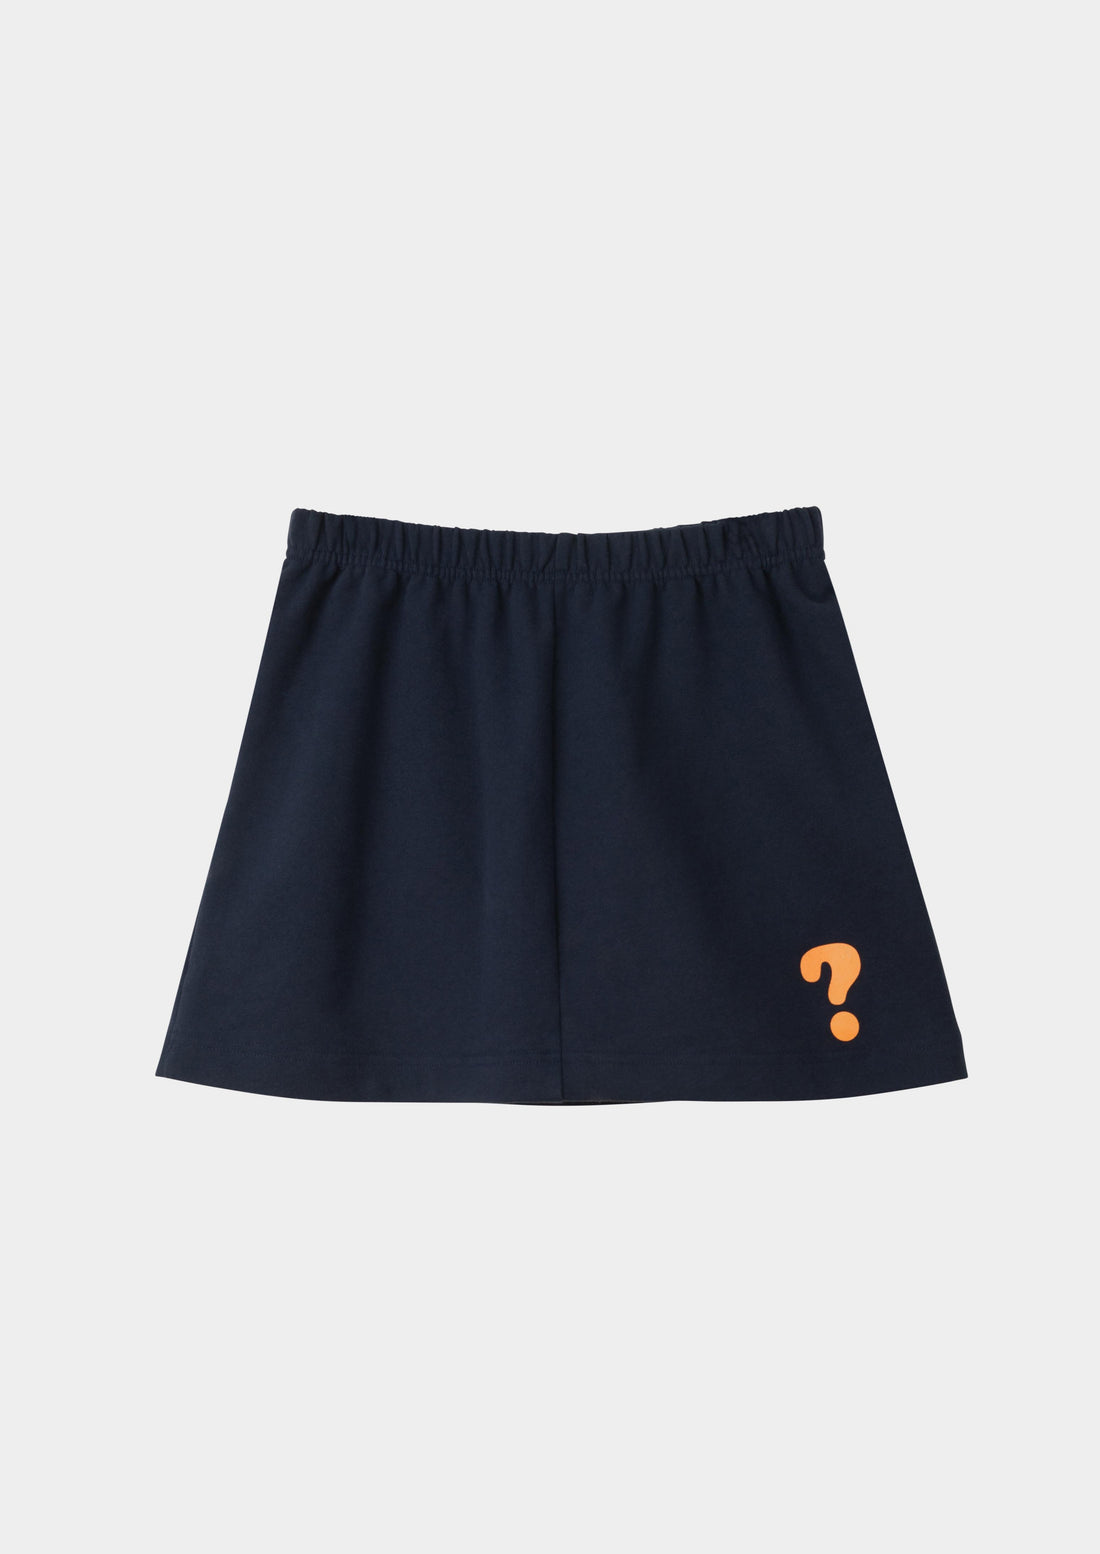 Dooz What's Your Sign? Sweat skirt with elastic waistband and question mark silkscreen print